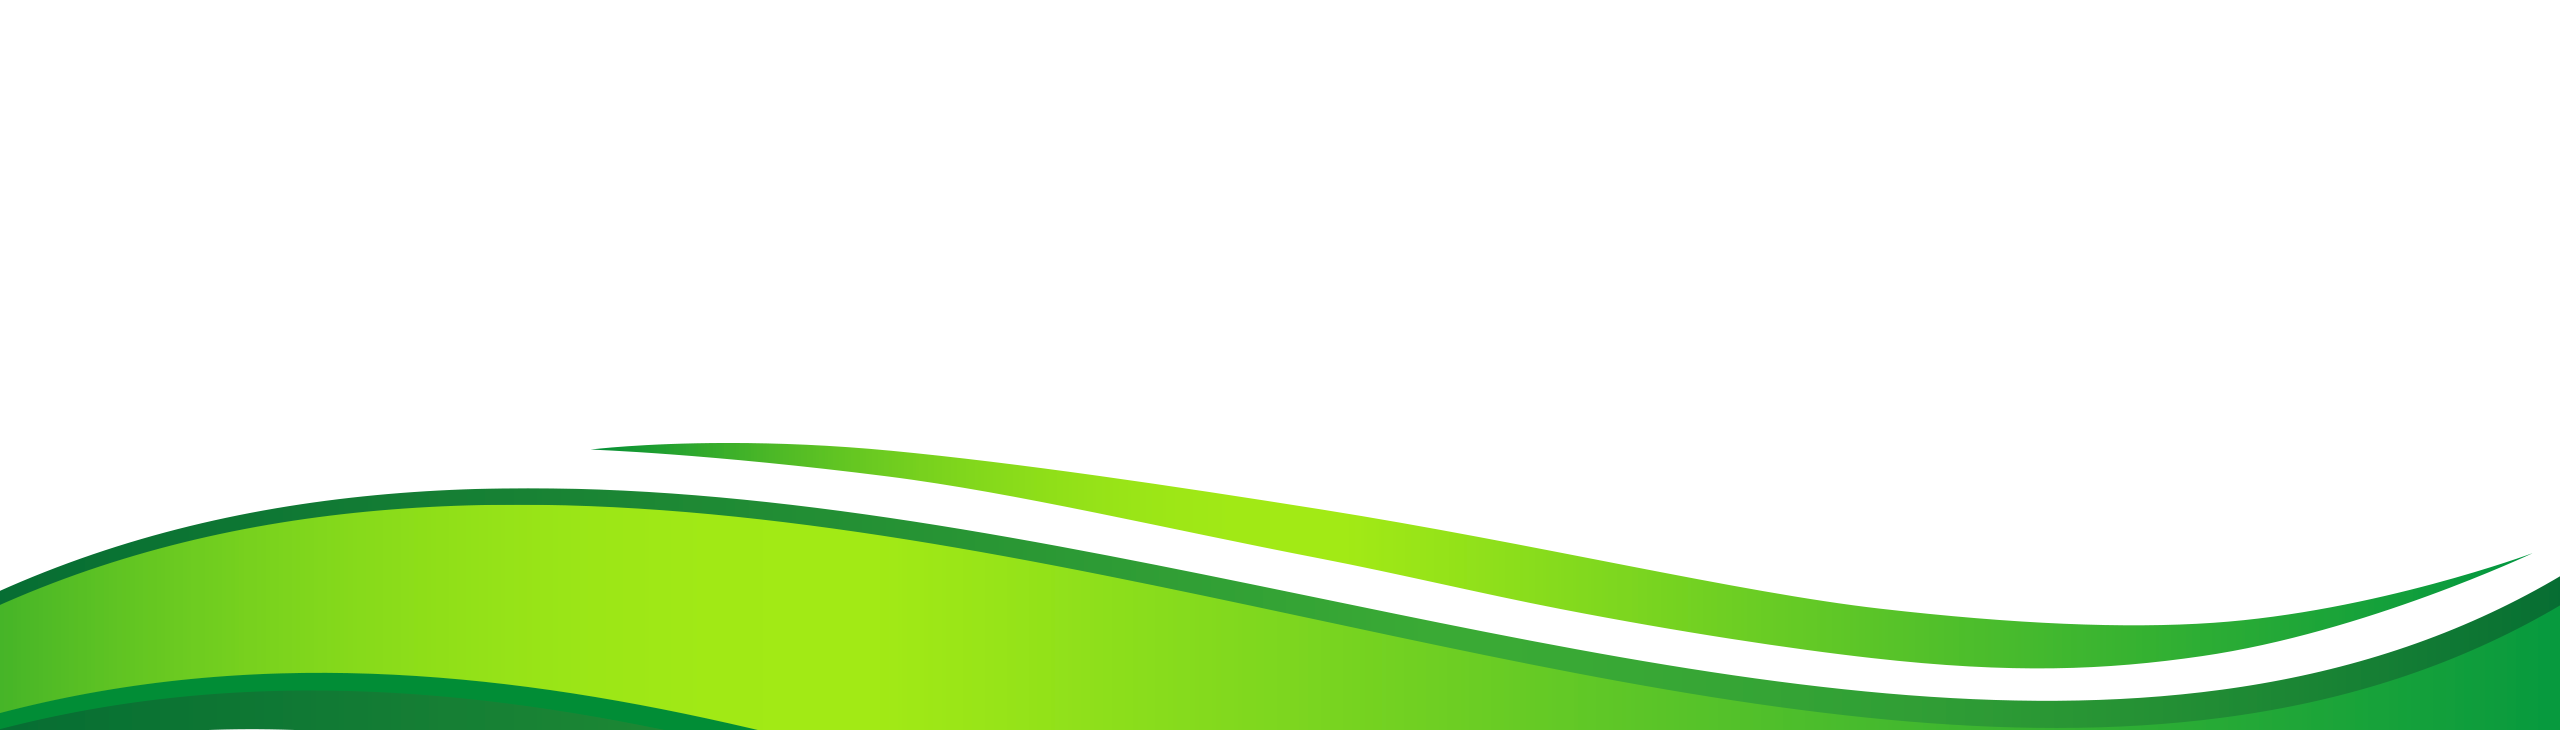 green wave vector png